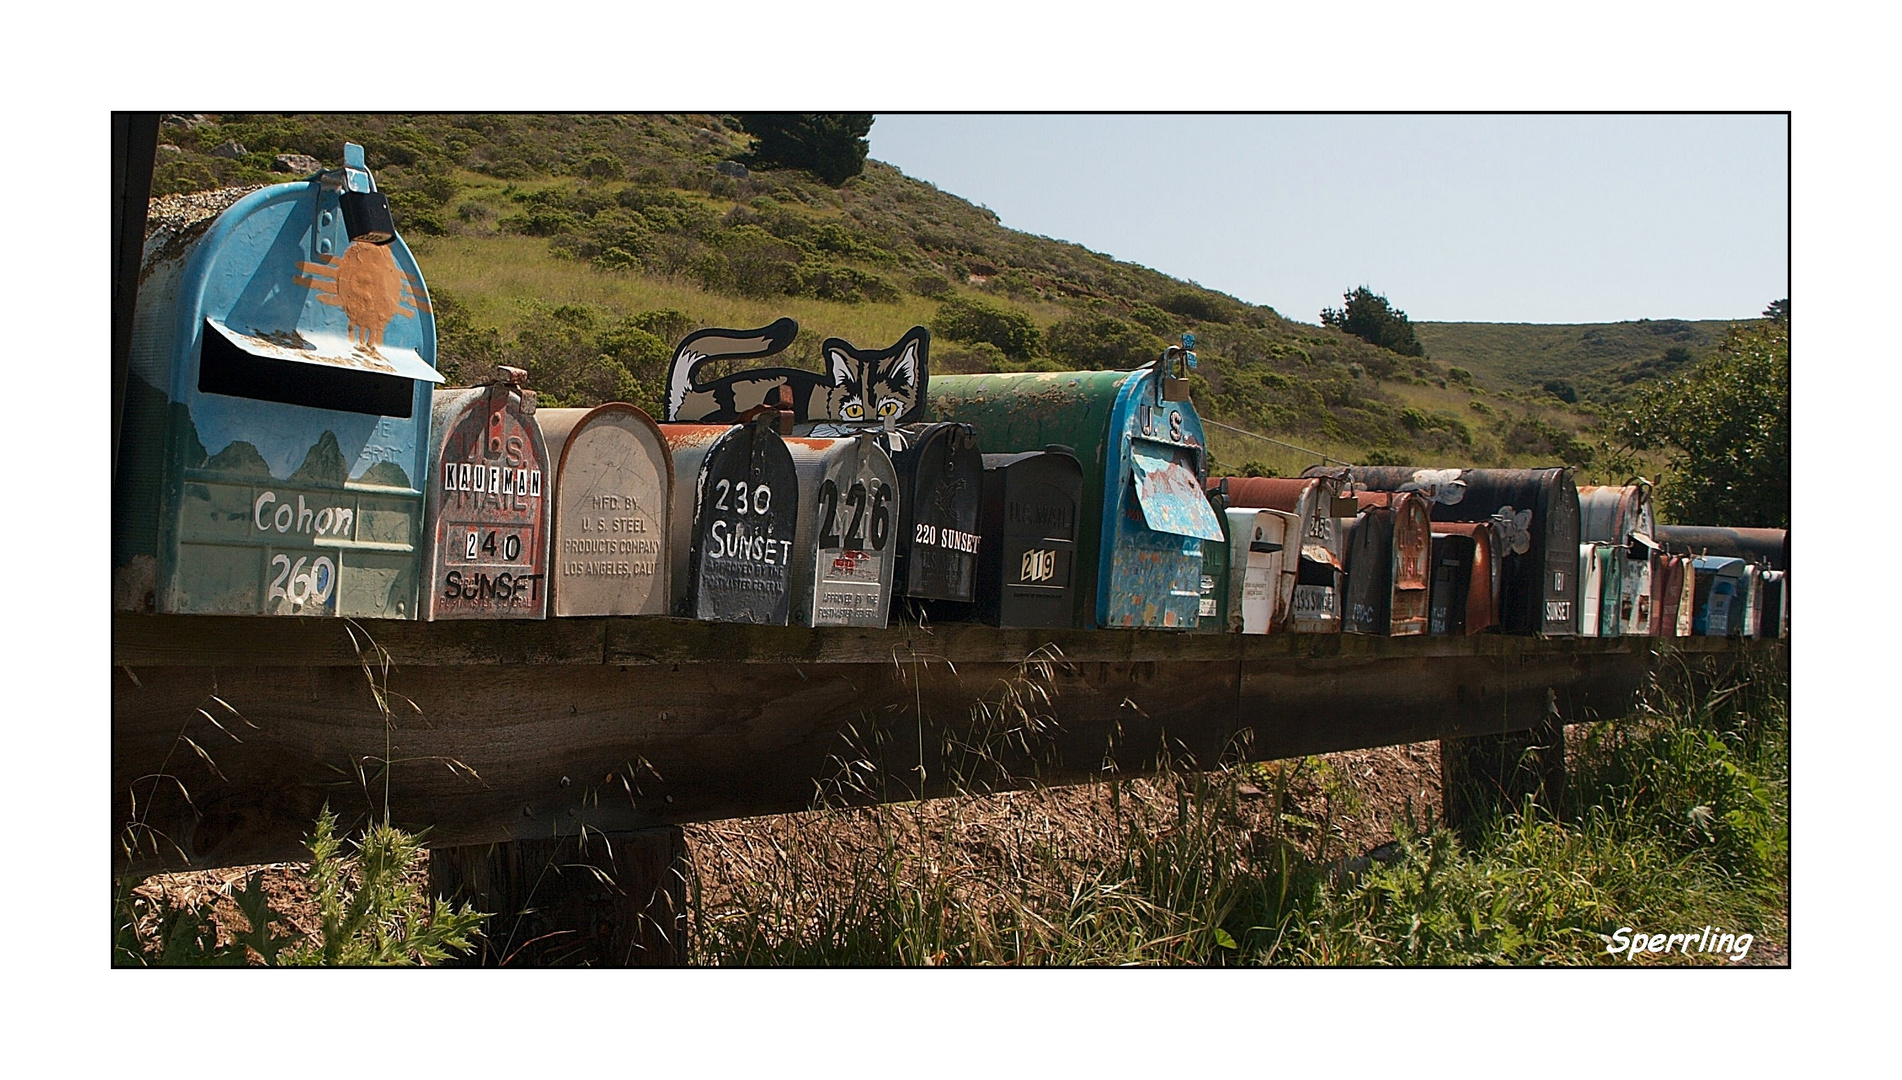 Mailboxes ......